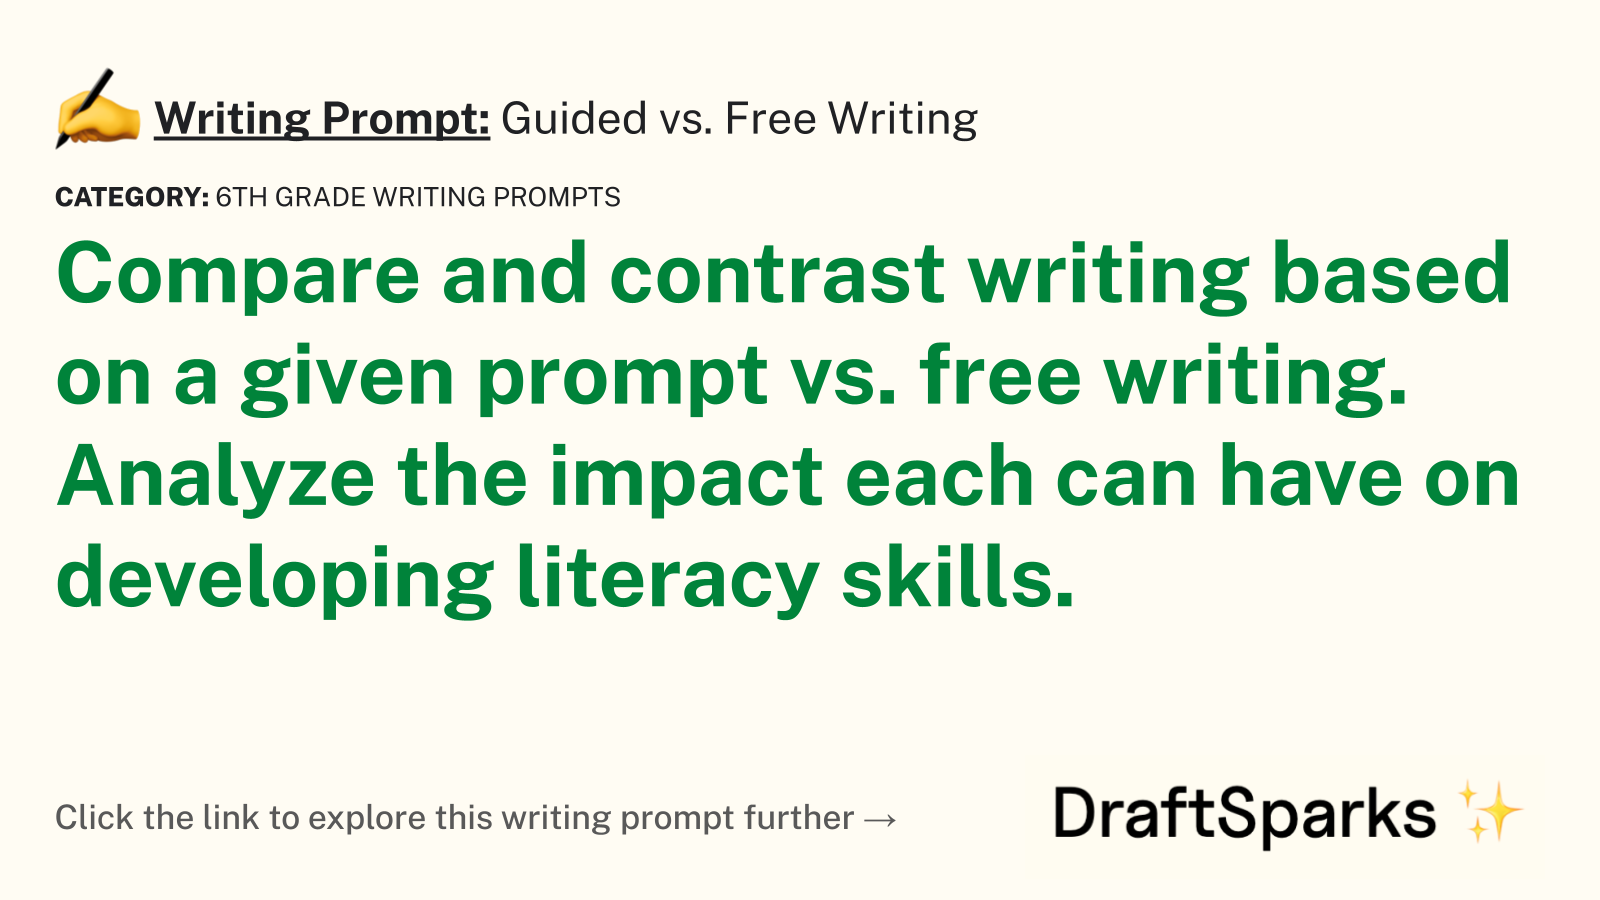 Guided vs. Free Writing